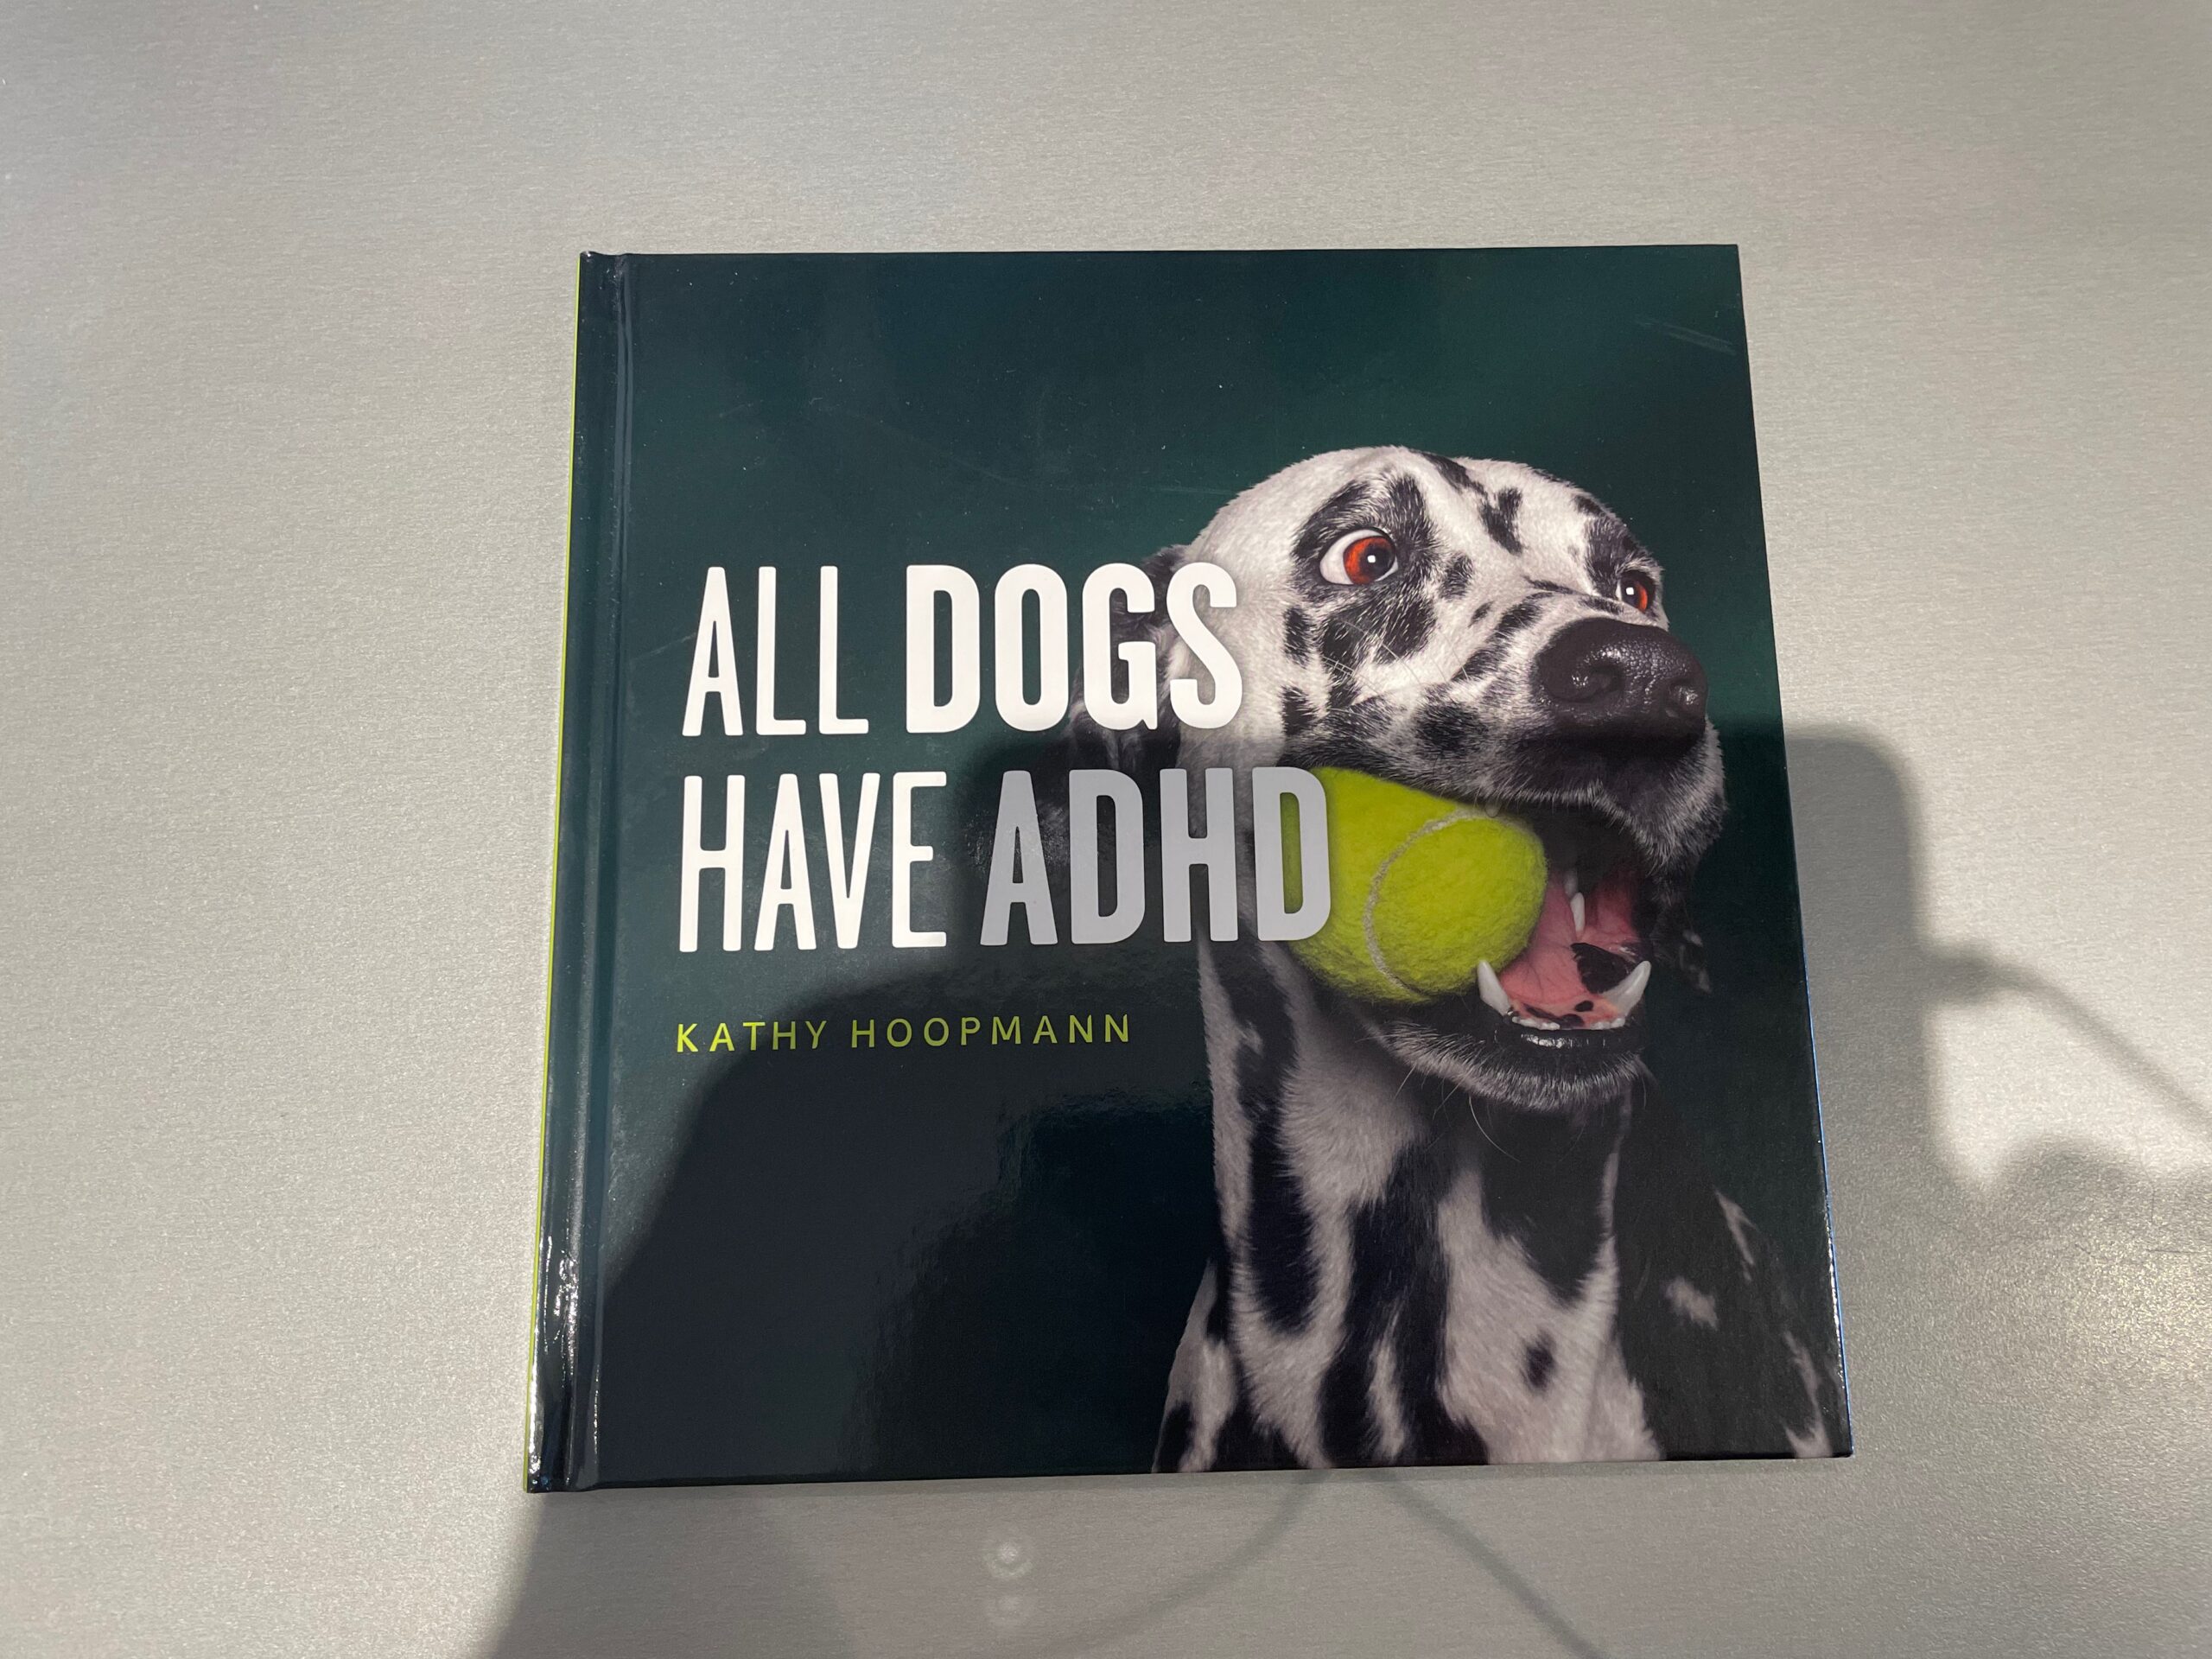 A book called All Dogs Have ADHD lies on a grey kitchen worktop.